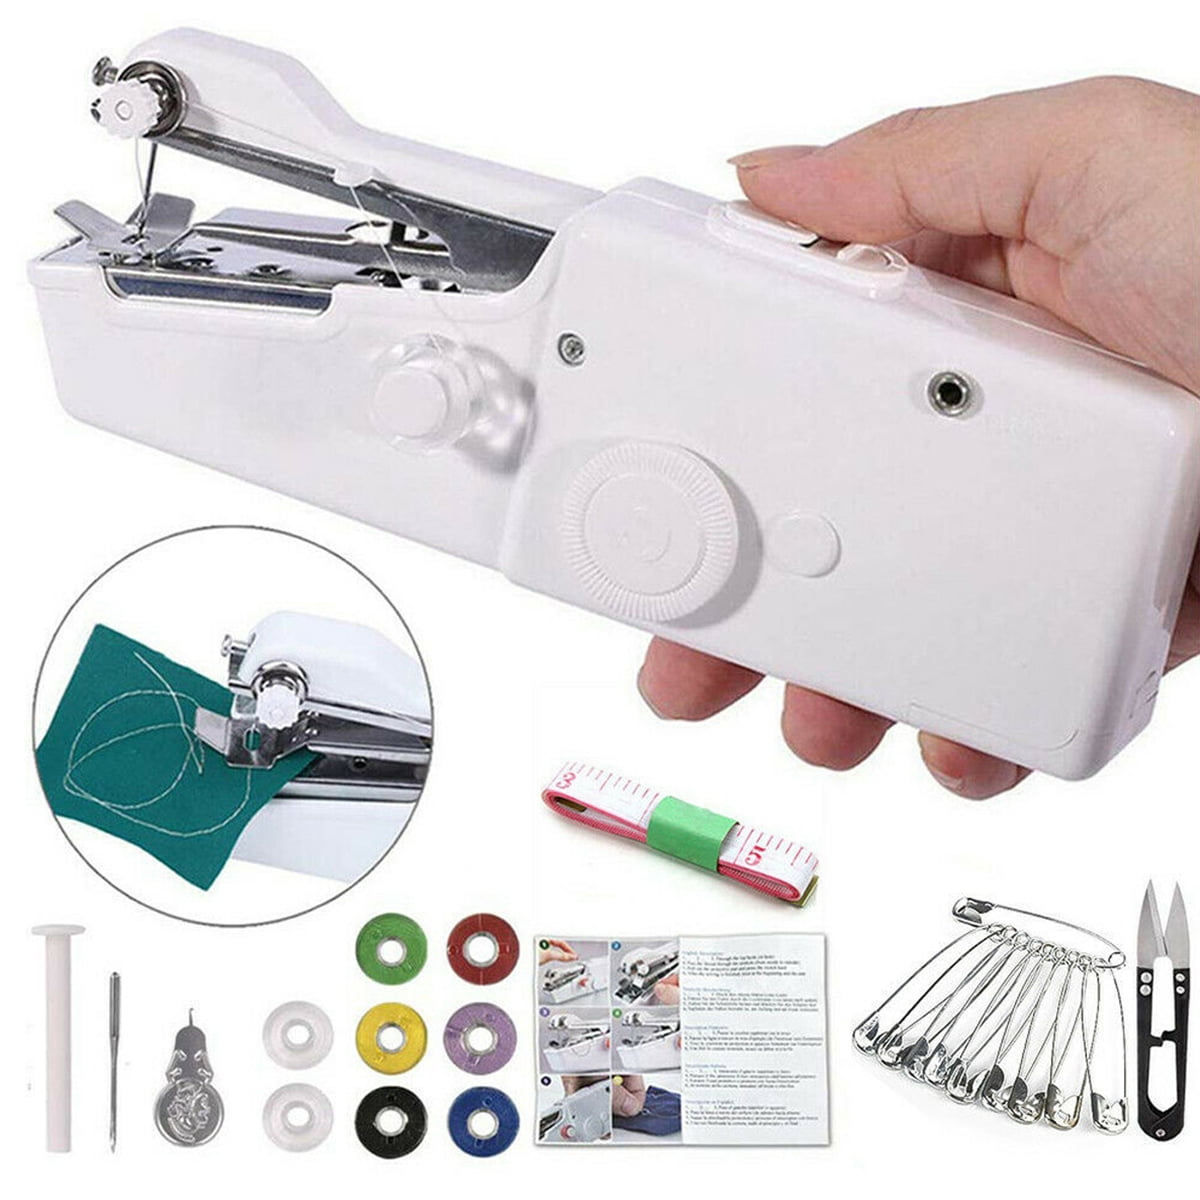 Hand-Held Portable Emergency Sewing Machine Battery-operated 